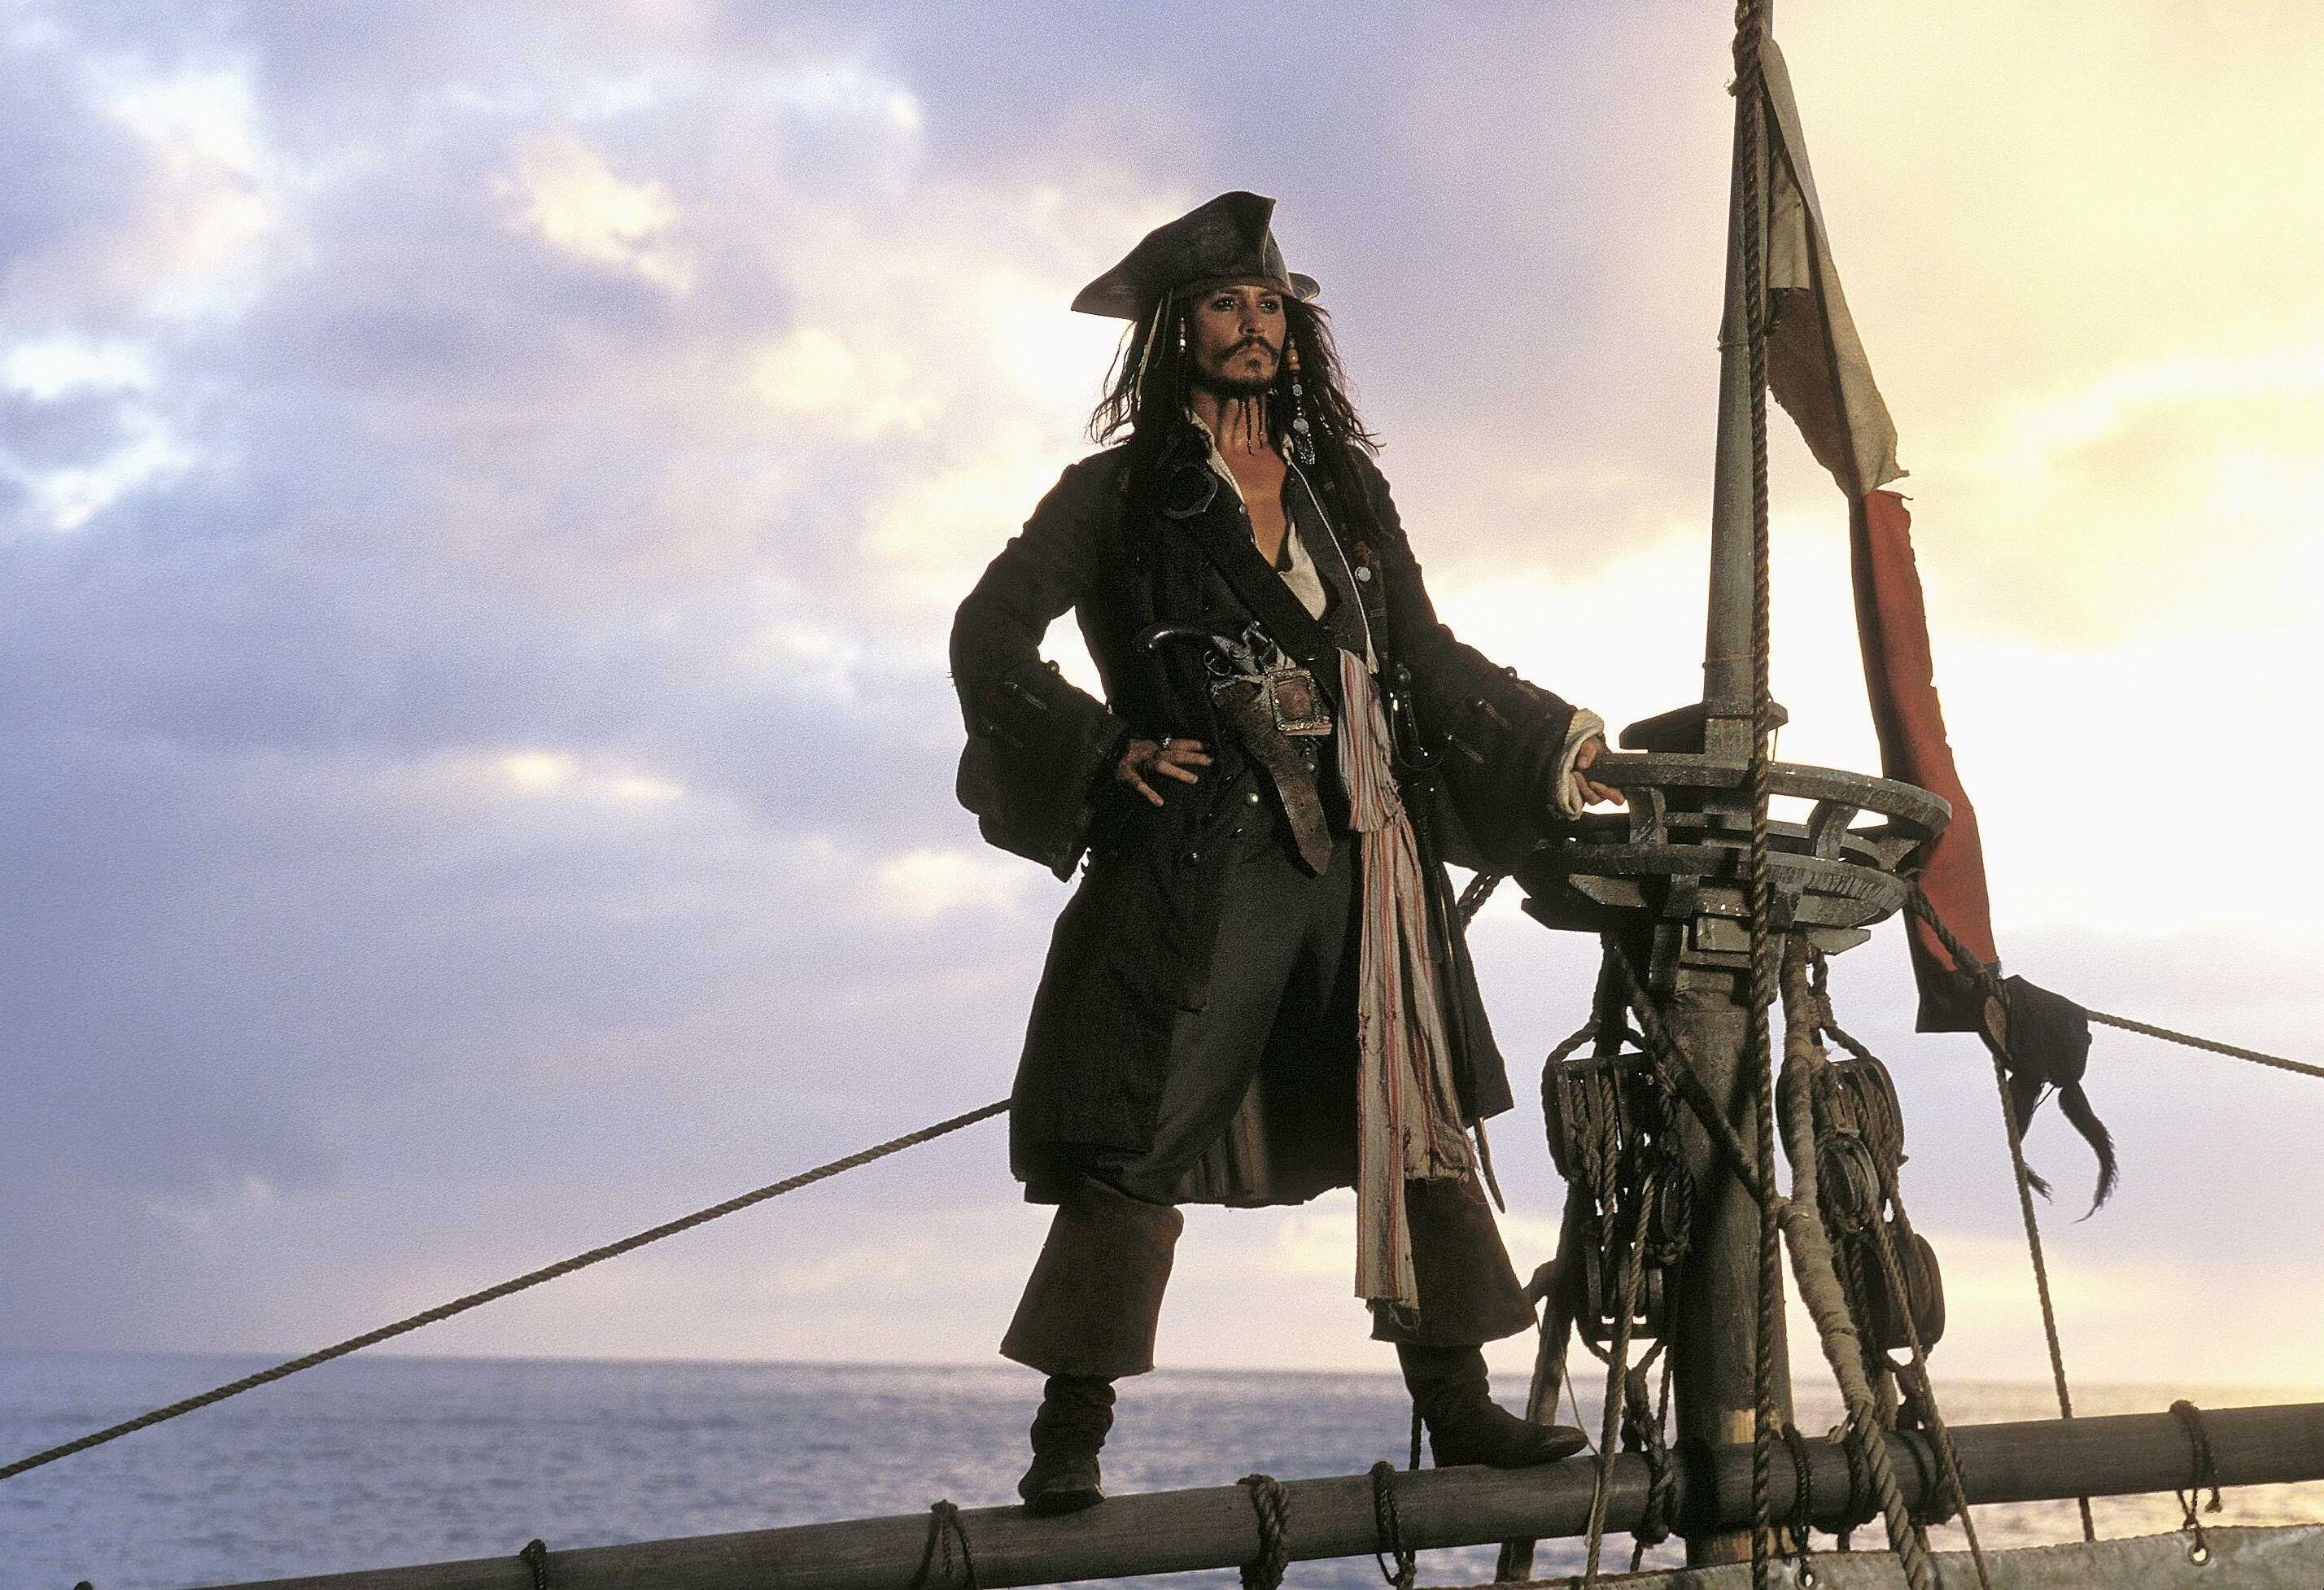 Pirates of the Caribbean: the Curse of the Black Pearl (2003)